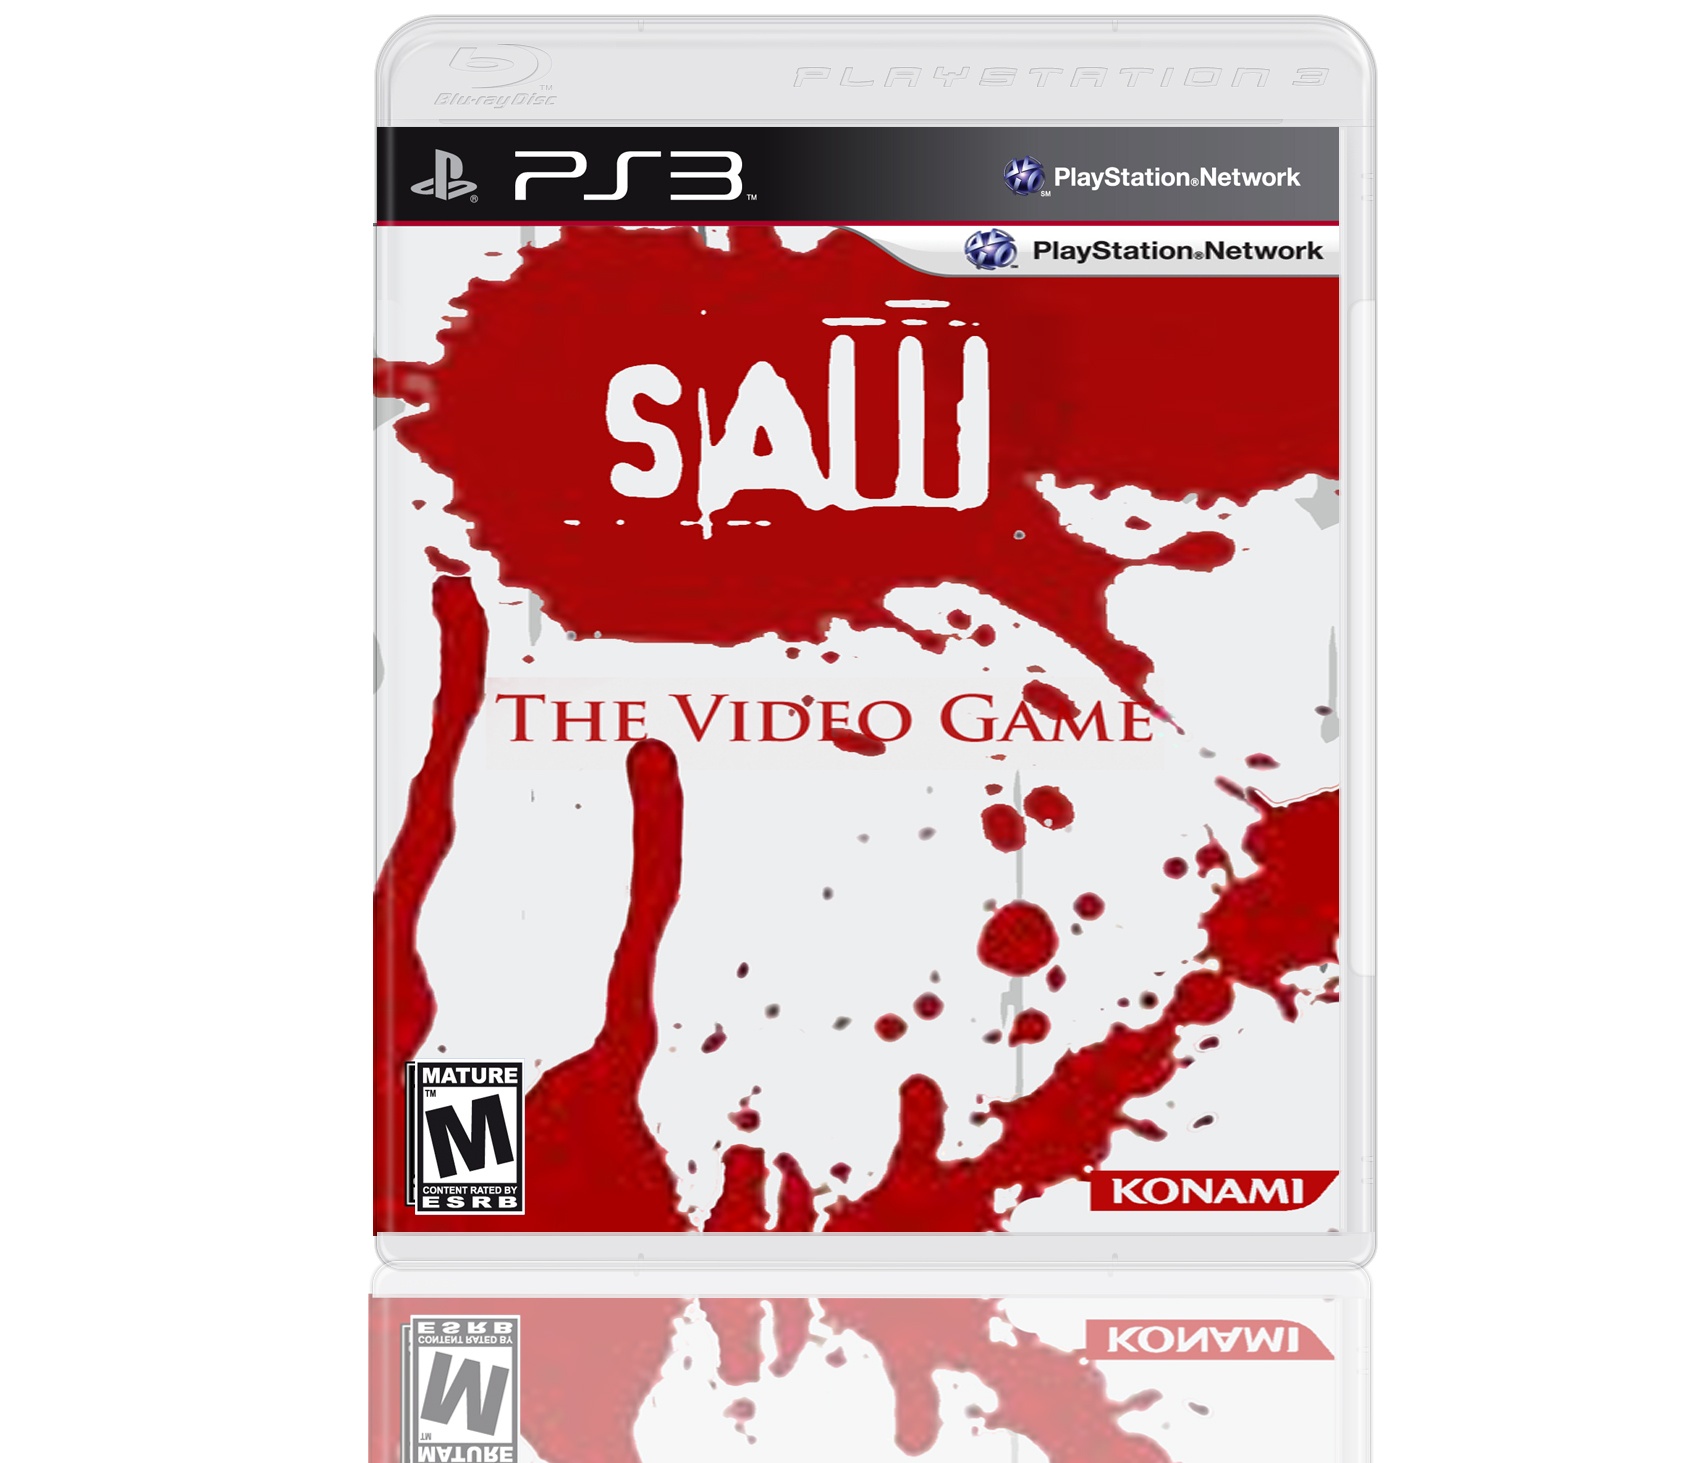 Saw: The Video Game box cover